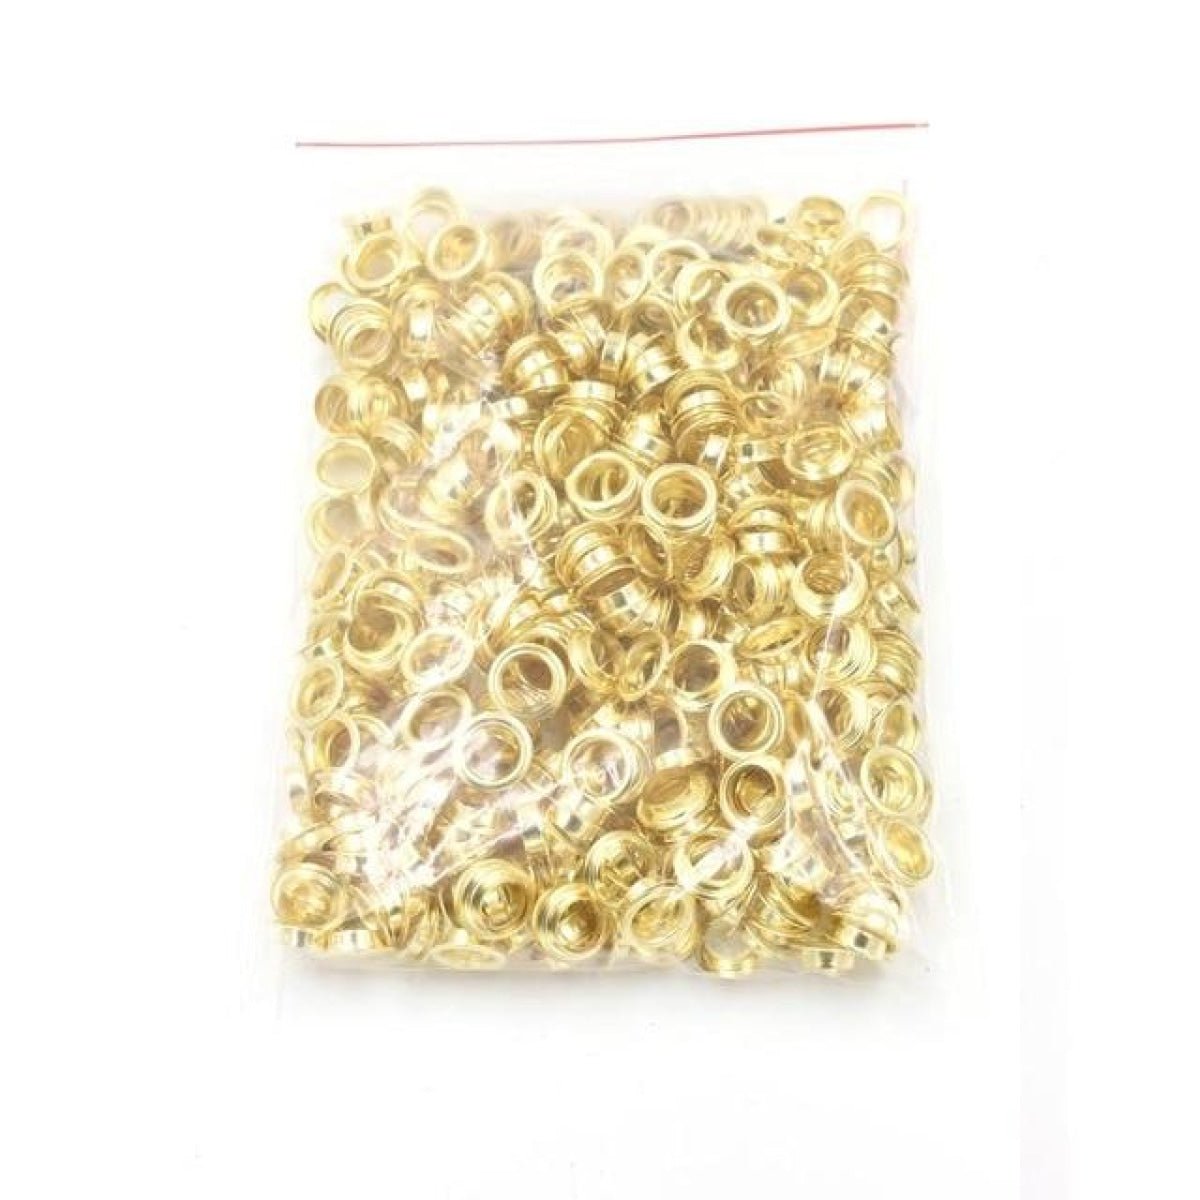 20pcs 10mm 12mm 14mm 17mm 20mm Eyelets Rivets Metal Buttonholes Buckle Clothing Buttons Bronze Chrome Gold Silver Grey Gun Metal Craft - 10mm Gold - - Asia Sell